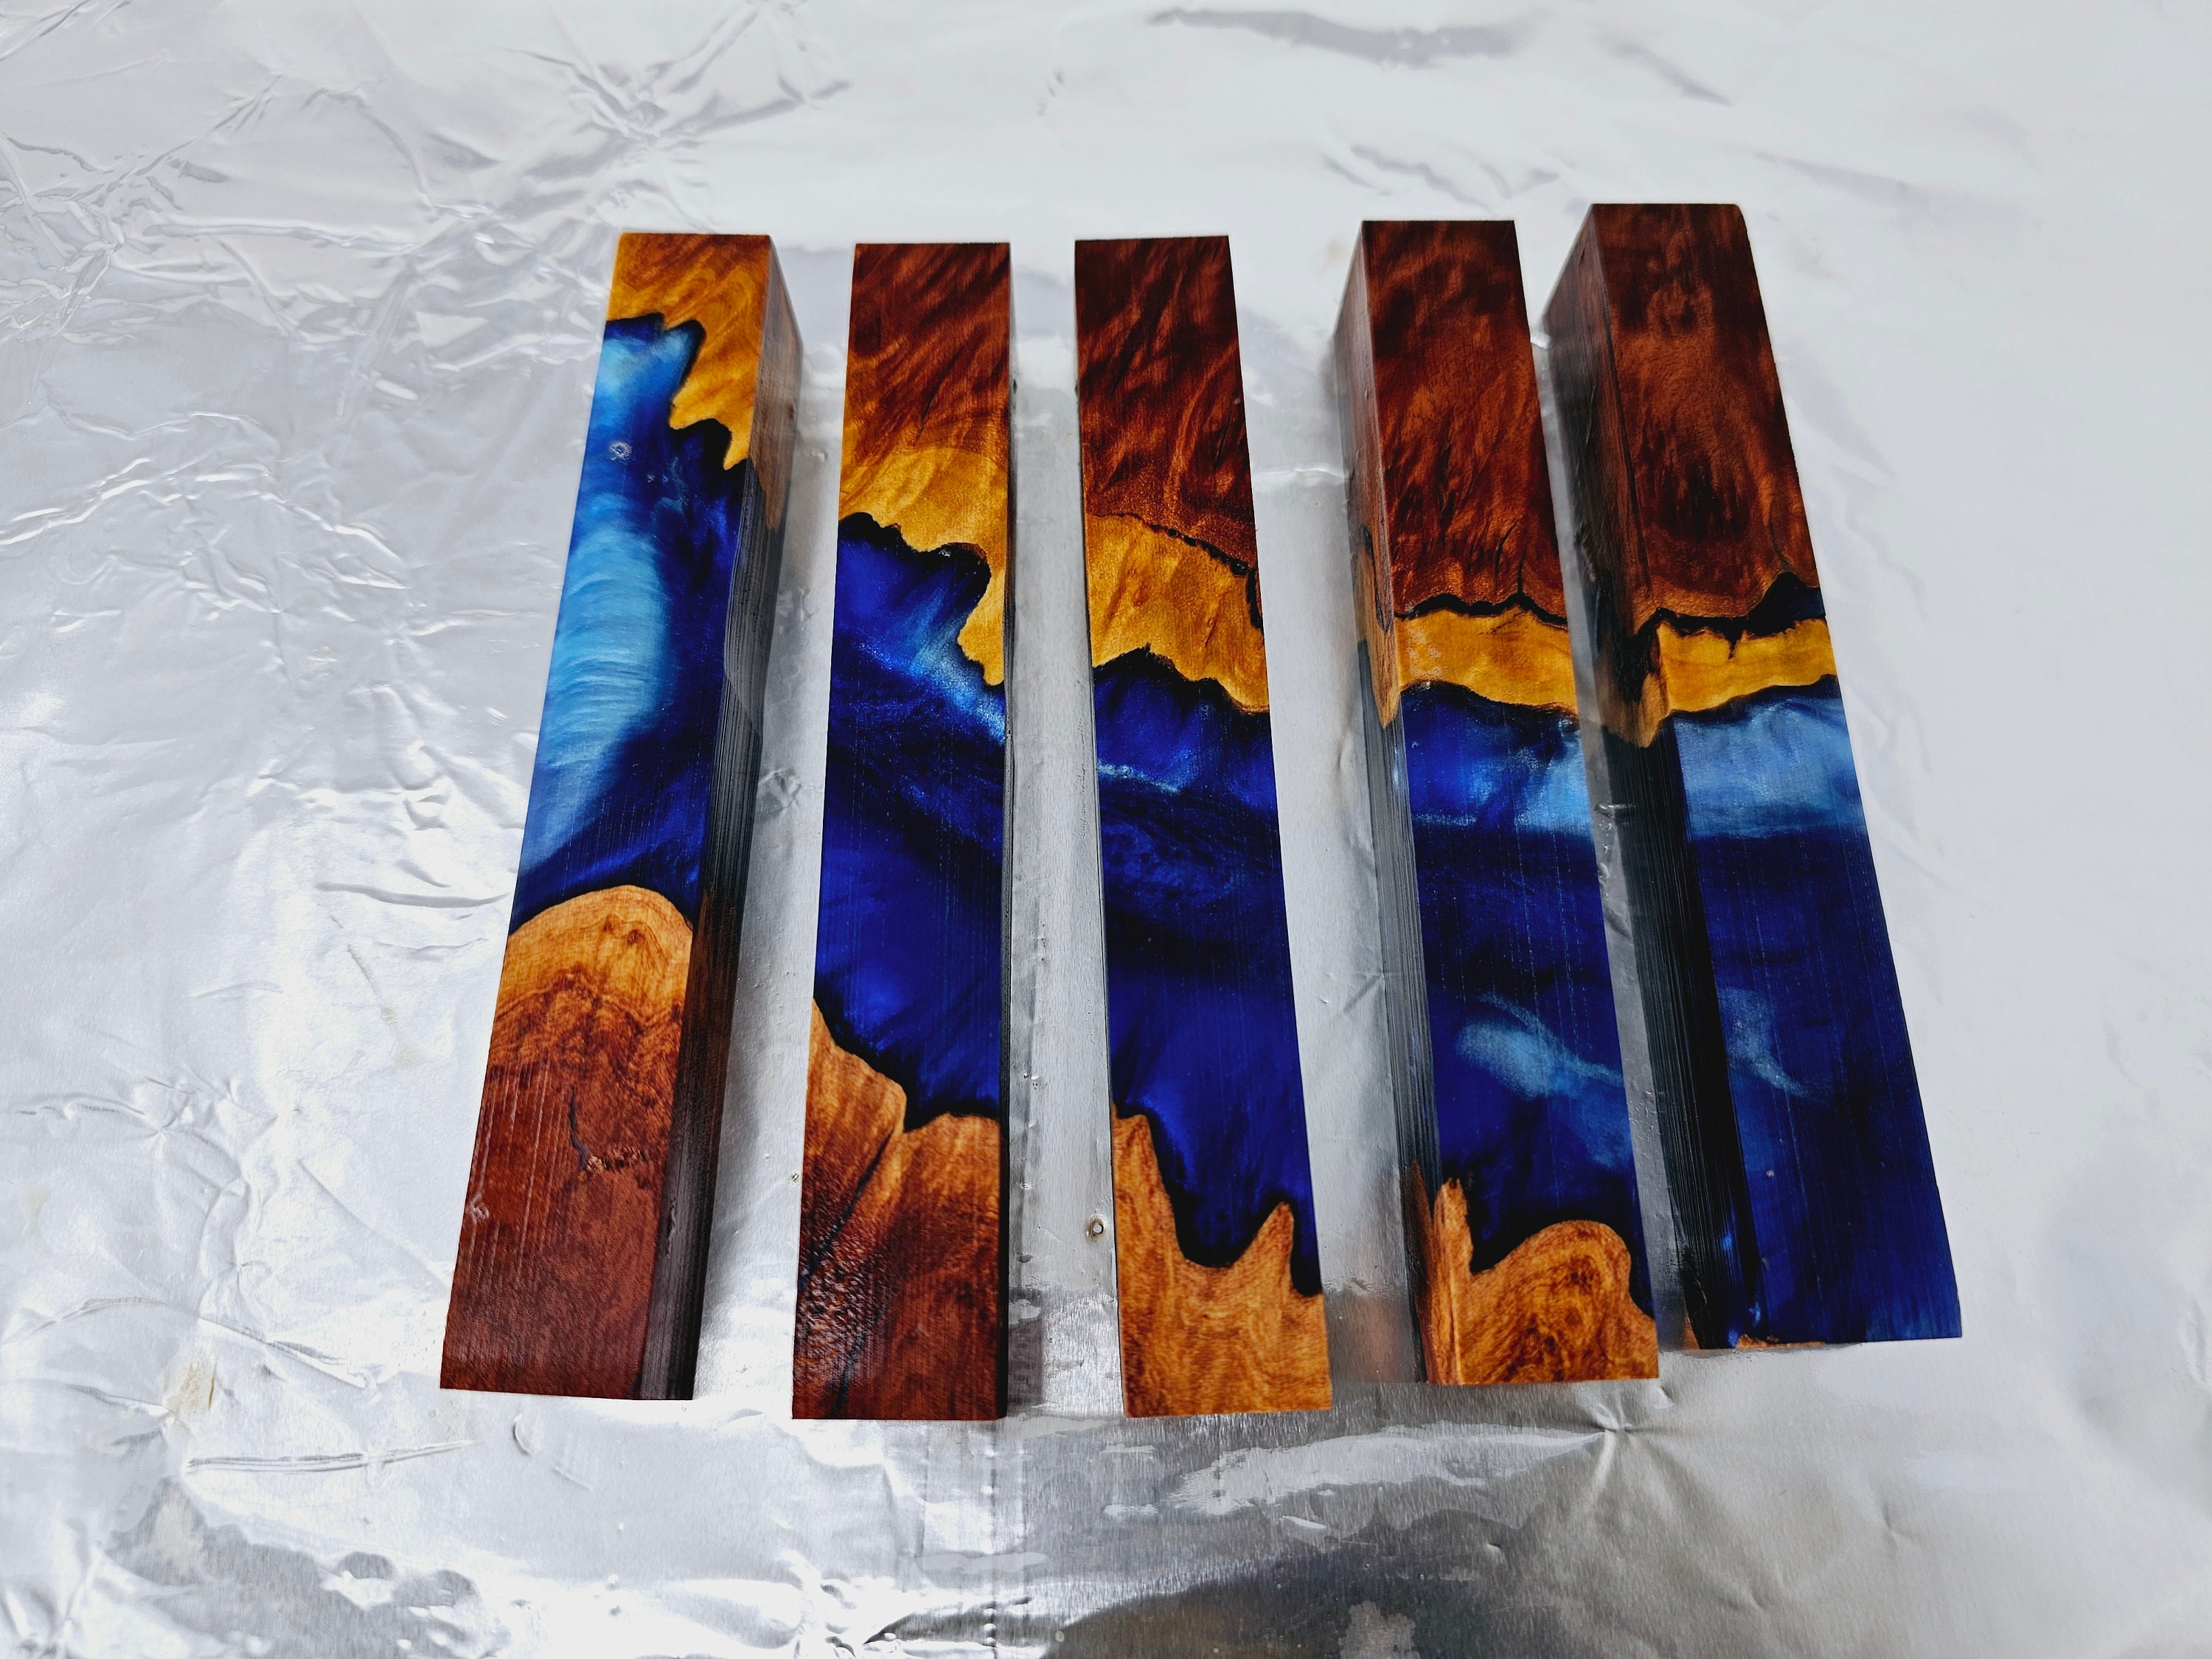 Wood and Resin Pool Chalk Holder Wood and Orange Fire Epoxy